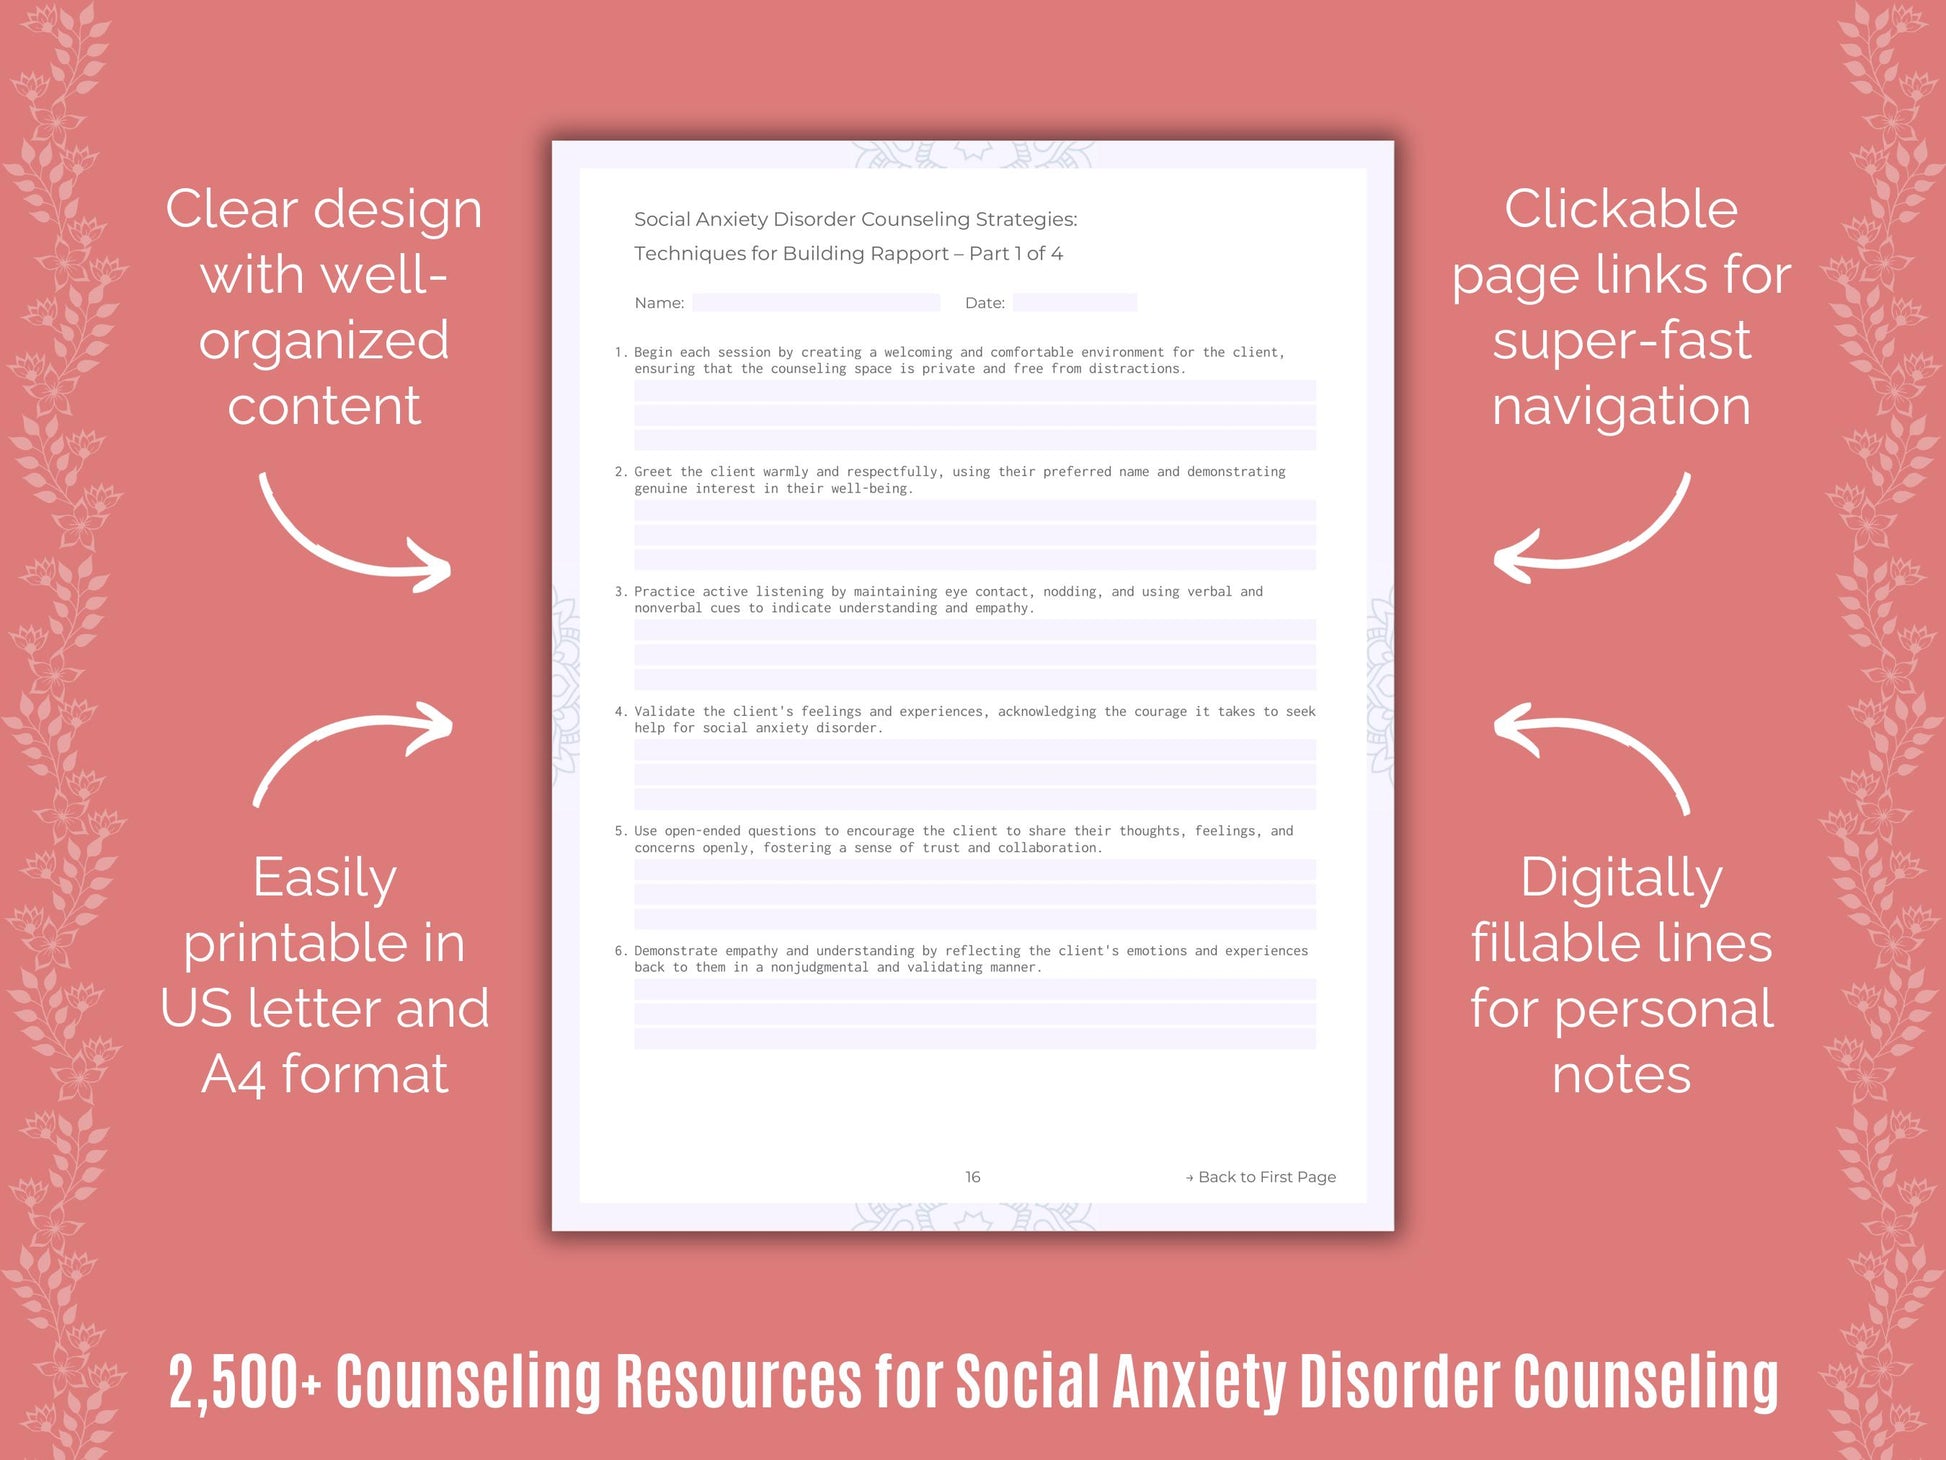 Mental Health, Social Template, Social Idea, Social Resource, Social Bundle, Anxiety, Social Workbook, Disorder, Therapist, Social Therapy, Social Worksheet, Social Counseling, Counselor